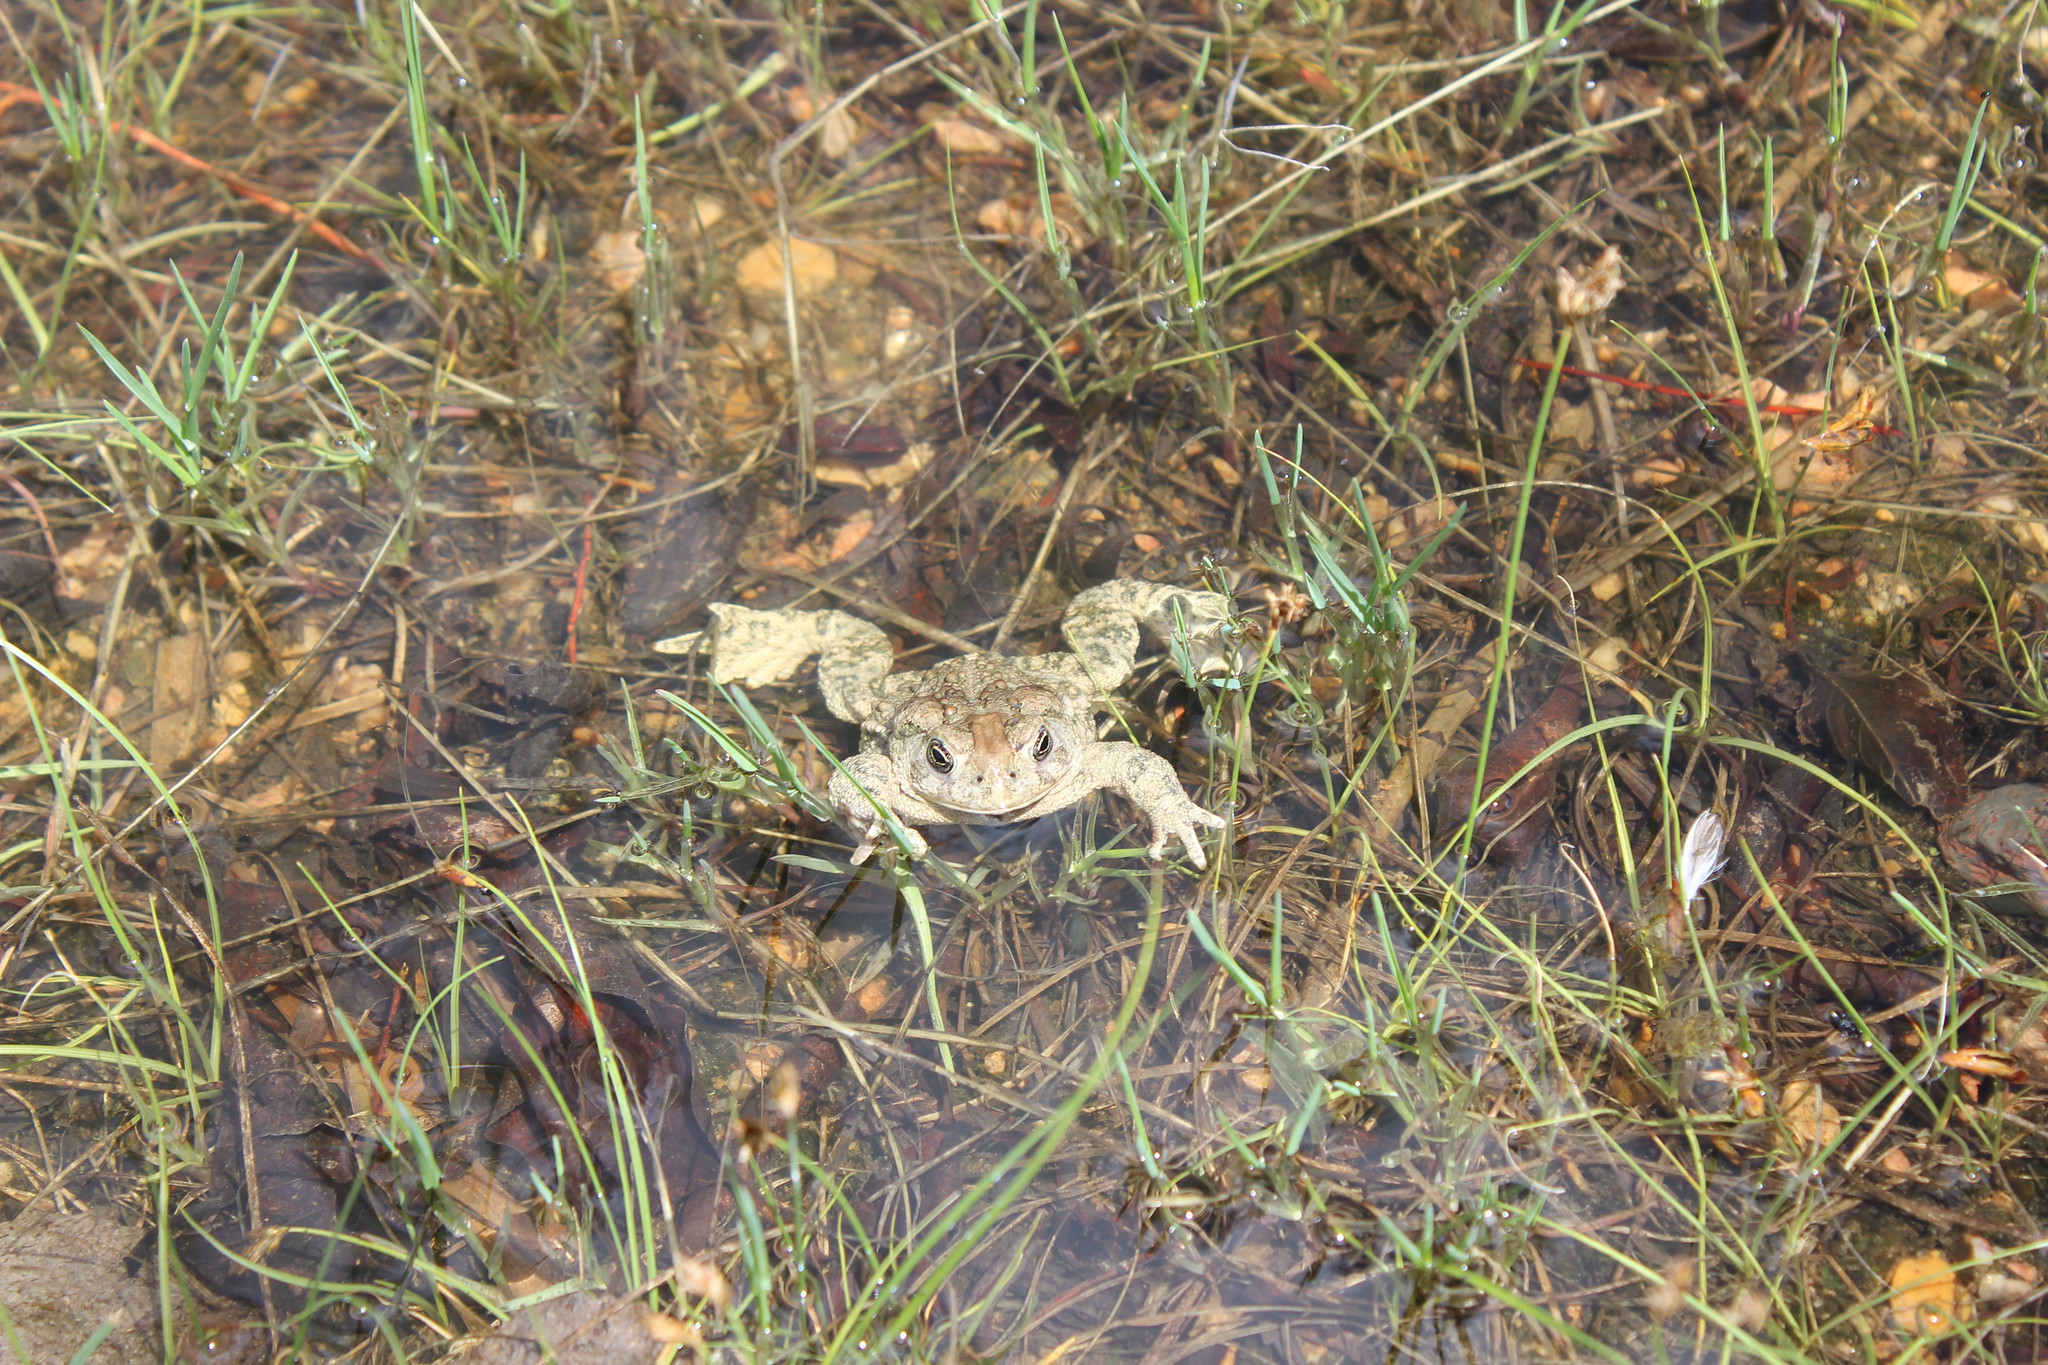 Toad floats in shallow, grassy water.